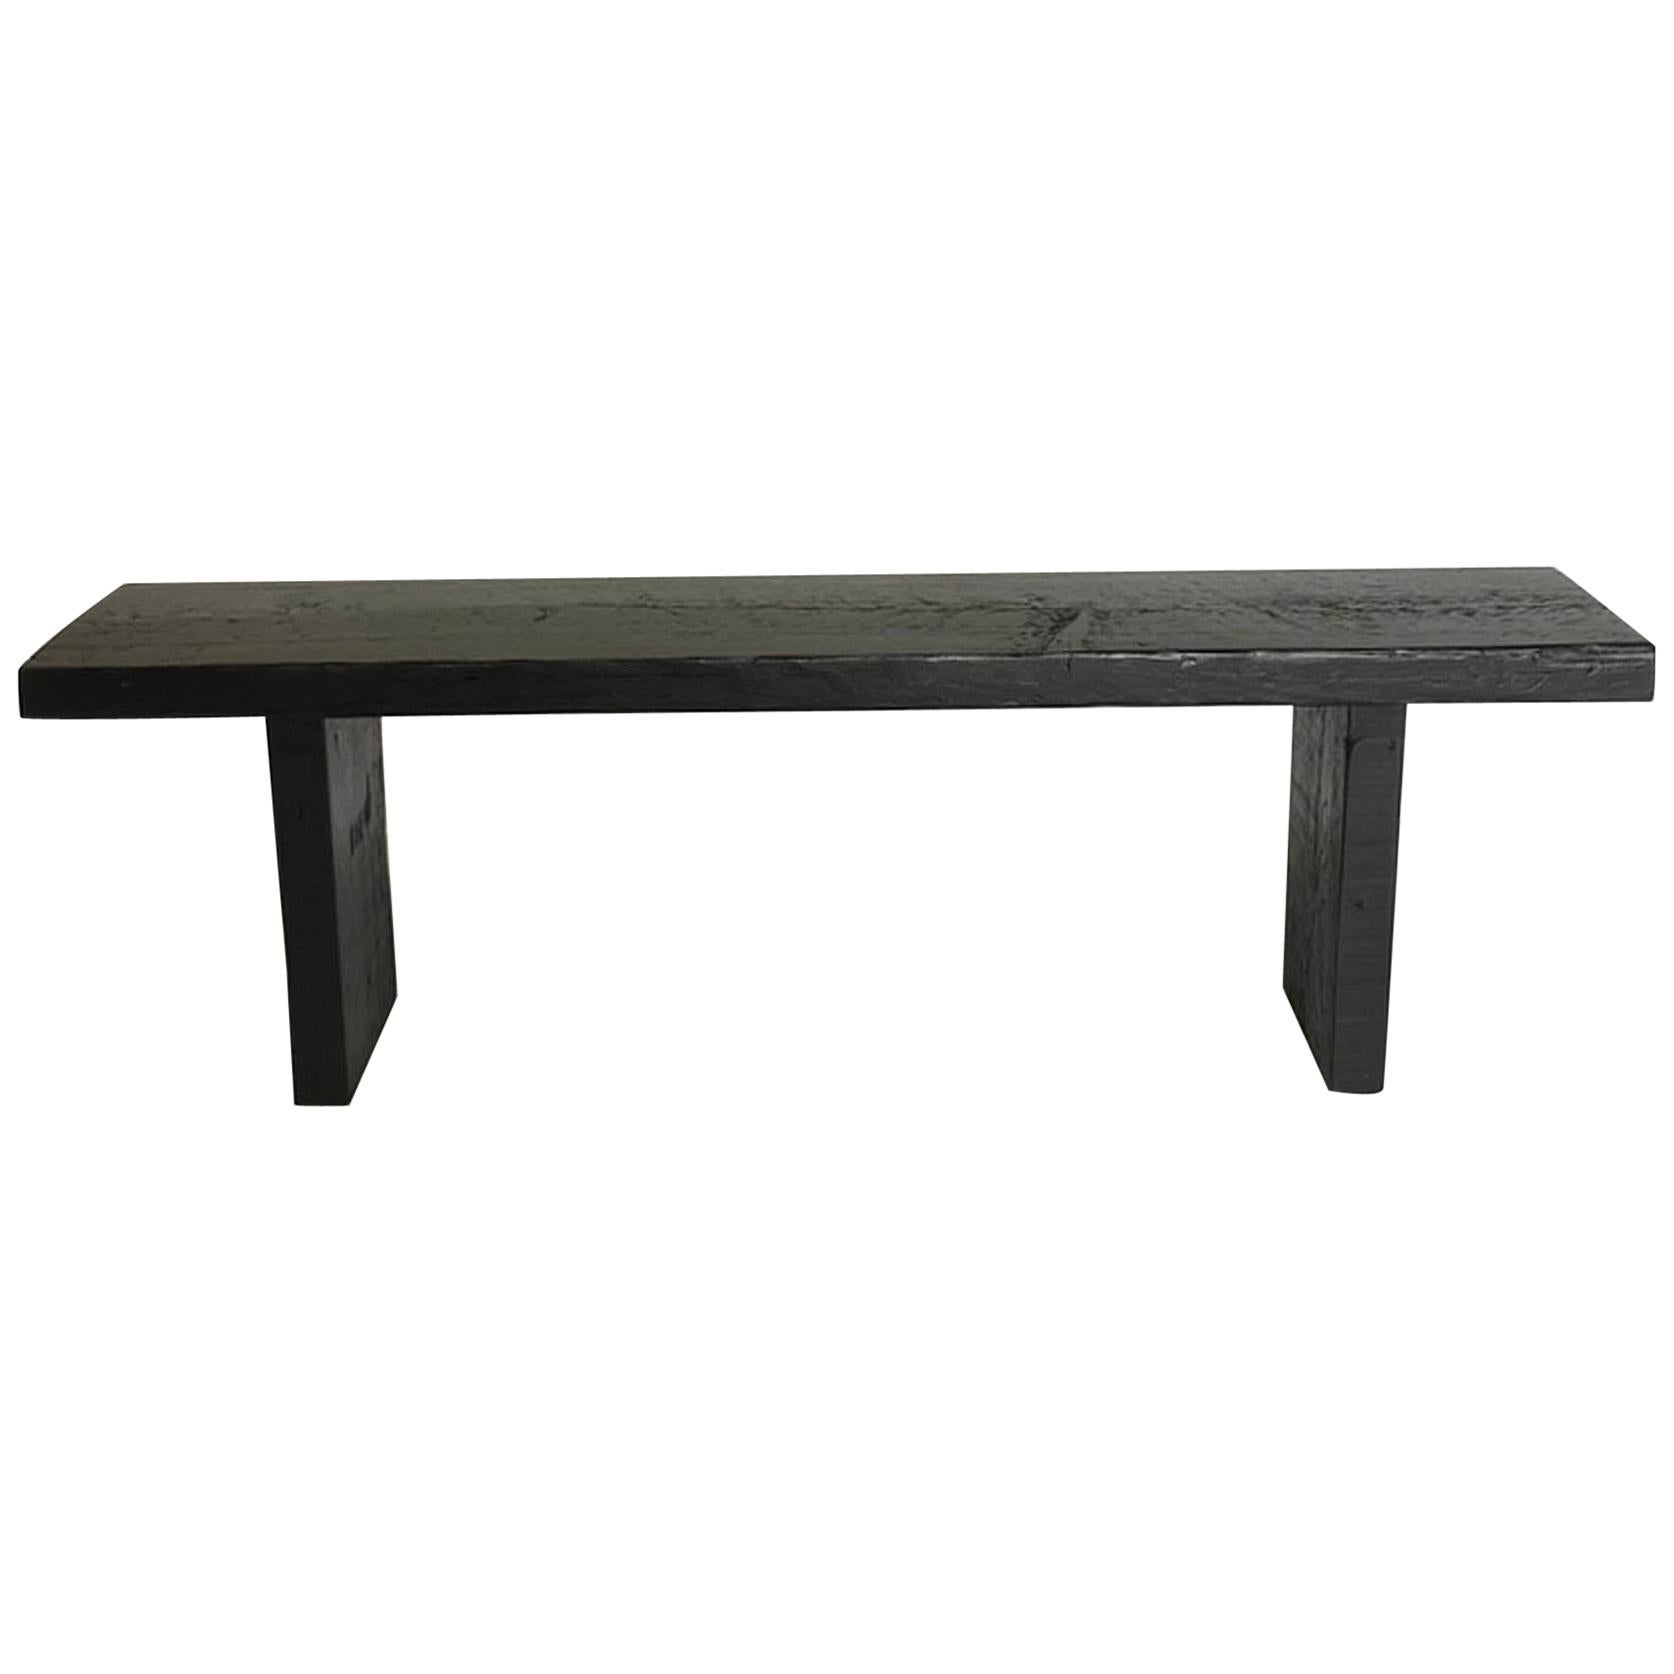 Reclaimed Wood Bench in Black Finish